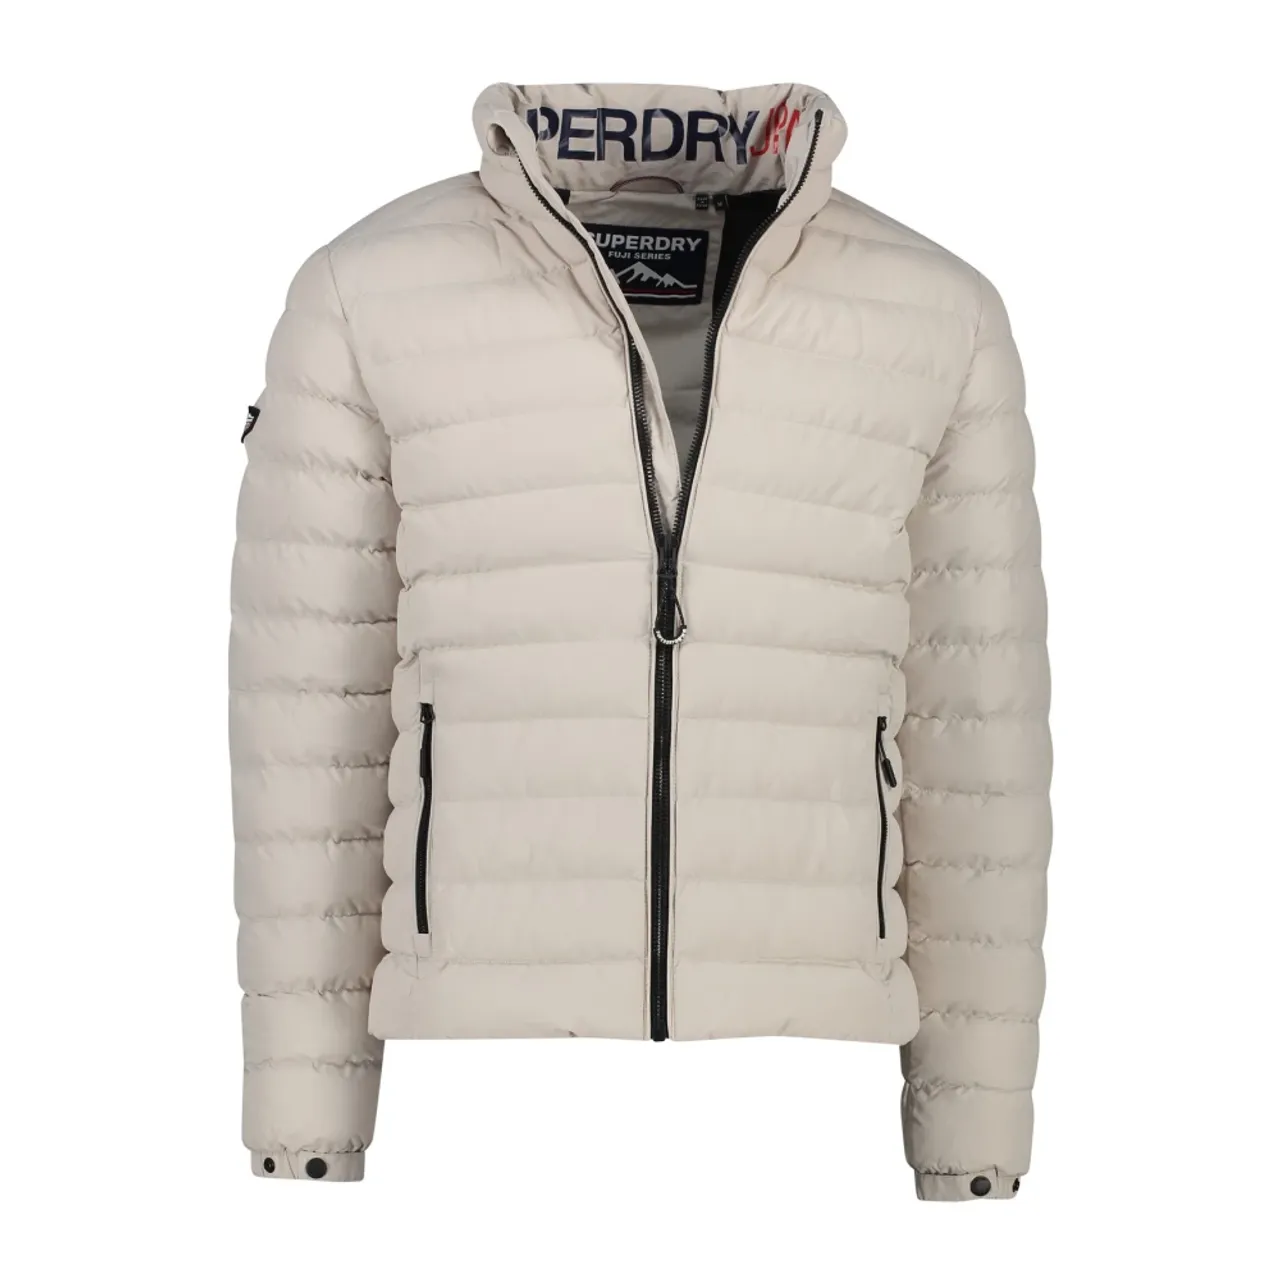 Superdry - Jackets 